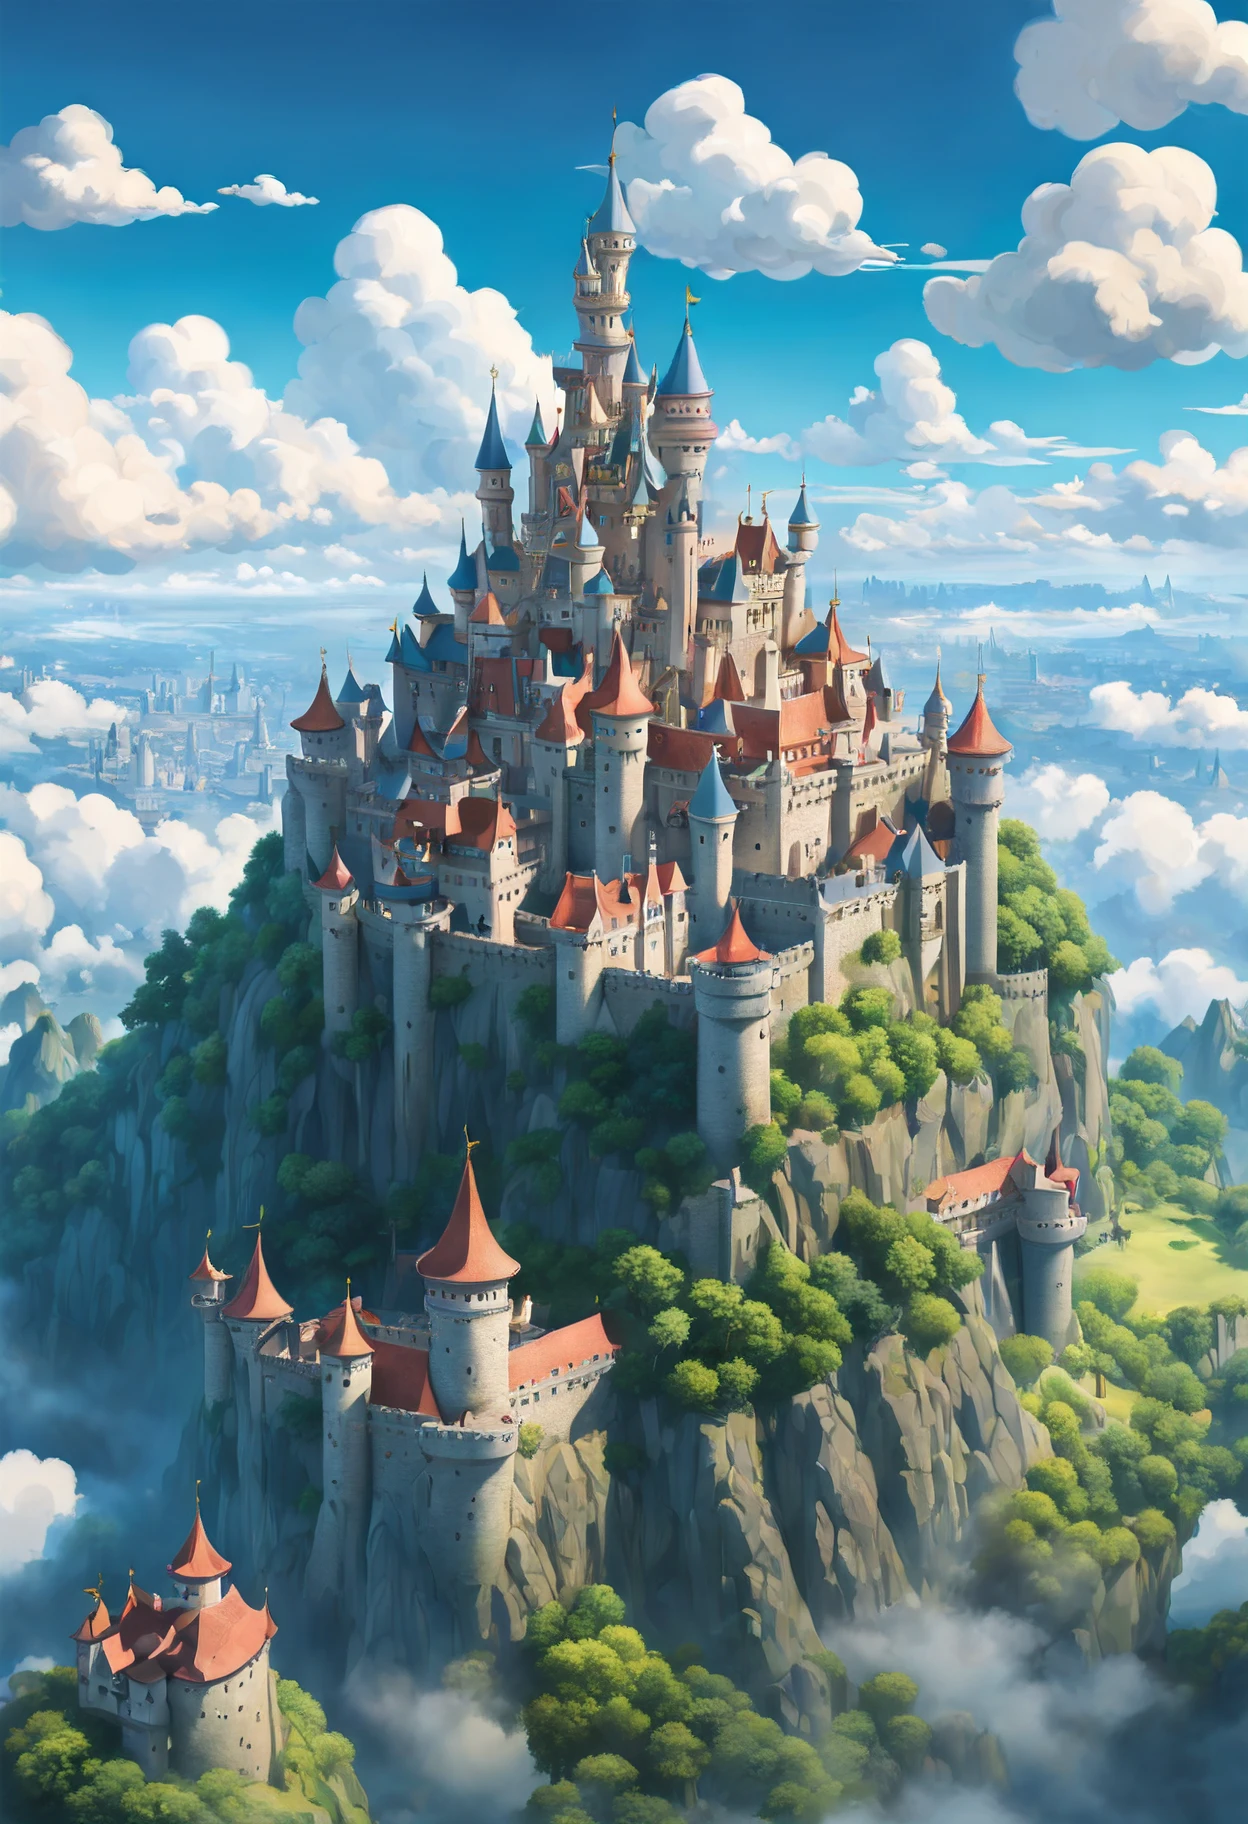 A fusion of Hayao Miyazaki and Studio Ghibli's art style, [castle|sky fortress], soaring amidst the clouds, splendid view of an (animated kingdom in the sky:1.5), as seen through the lens of a (drone:1.2), captured in vivid, panoramic 8K, painted with whimsical colors, set in a (sunlit afternoon), featuring meticulous details of the castle architecture, capturing the essence of a dreamlikeart and mdjrny-v4 style, nostalgic lighting setting a vintage charm, highlighted by a [(Steven Spielberg:1.2) inspired cinematic magic], intricate detailing reminiscent of Claude Monet and Vincent van Gogh's style, a fairytale come alive in a (telephoto lens) shot